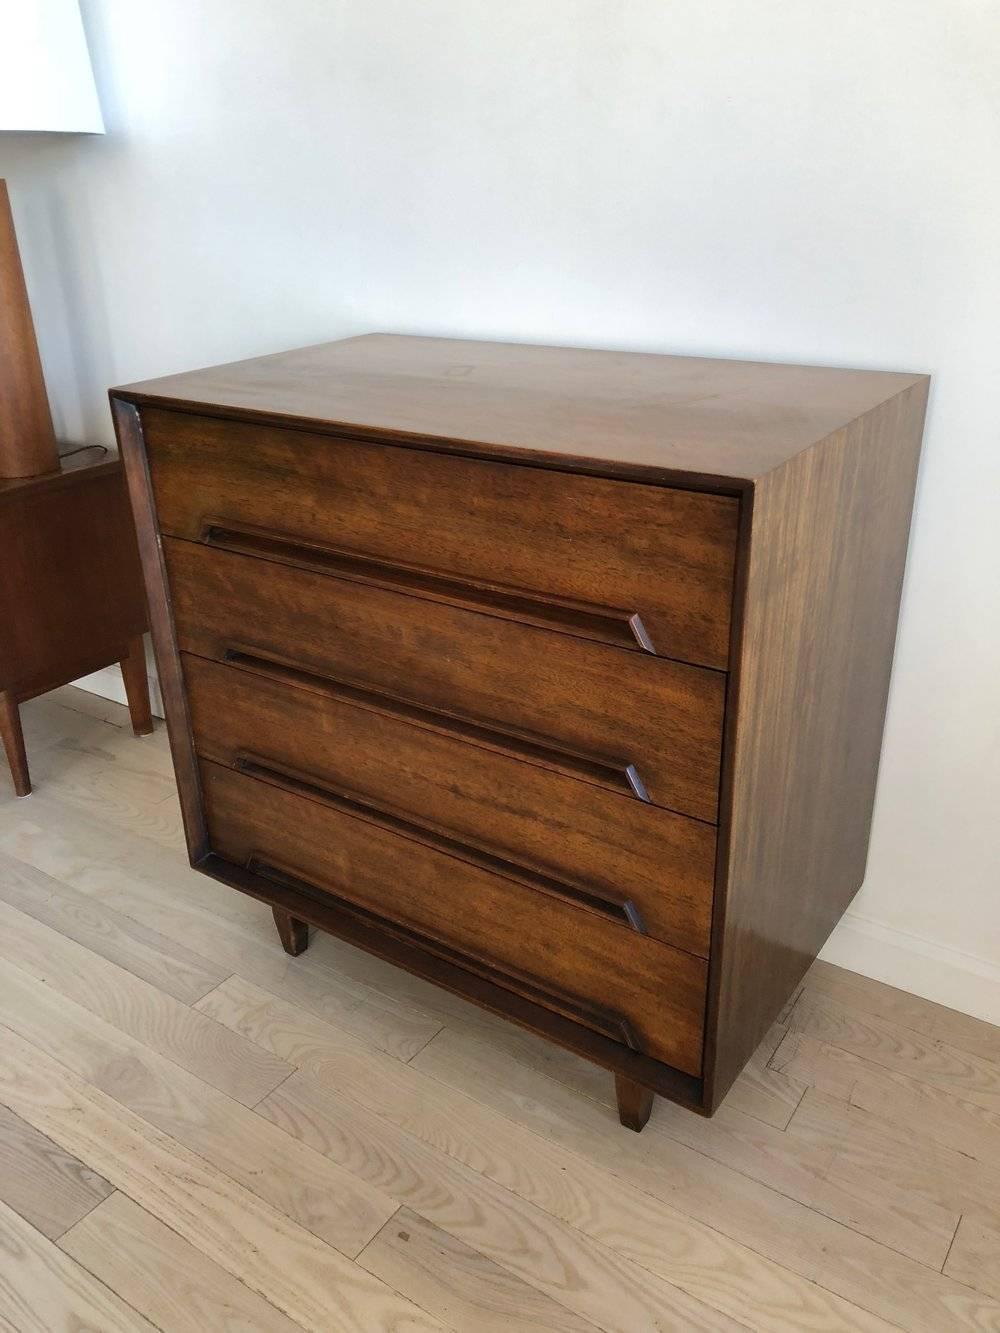 Awesome midcentury Milo Baughman for Drexel Perspective dresser. Four deep drawers, all pull smooth. Mahogany wood. Top drawer has sections. Excellent vintage condition. 

Measures: 32